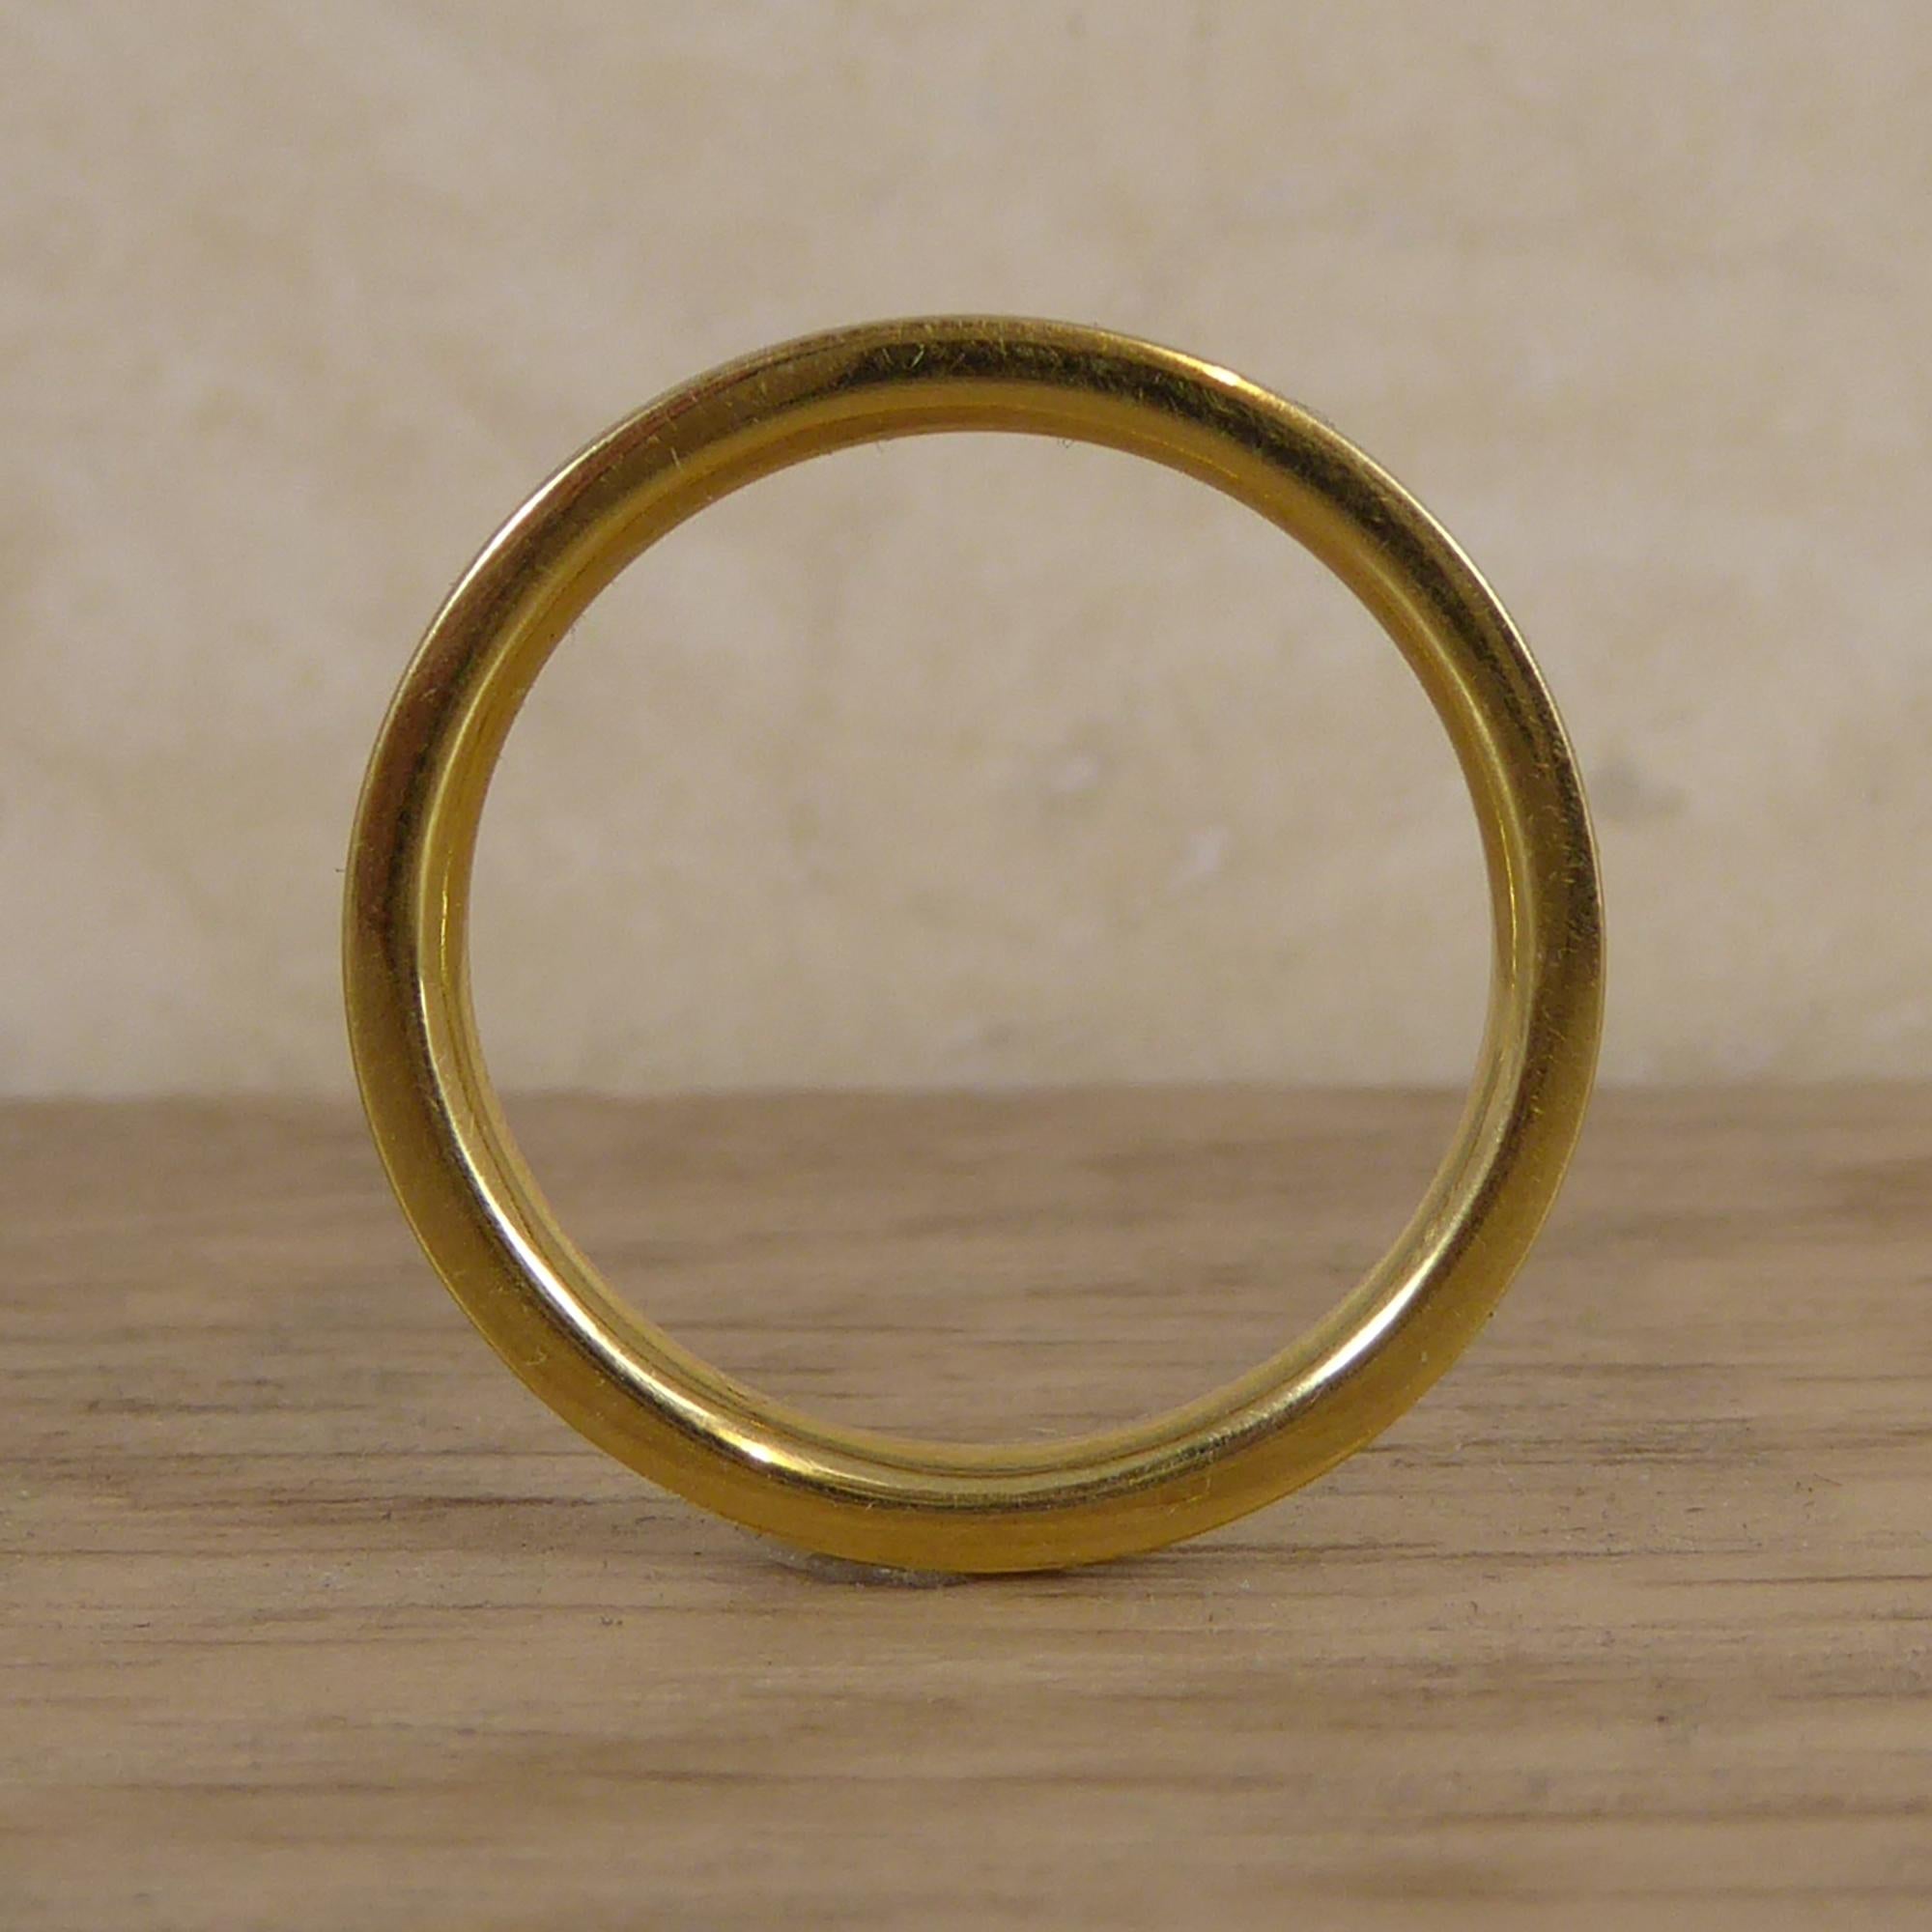 A strikingly modern band suitable for wearing as either a contemporary wedding ring or designer dress ring.  Crafted from a unison of yellow metal testing as 18ct yellow gold with an inner circle of titanium.  This fashion ring is finger size 5.5